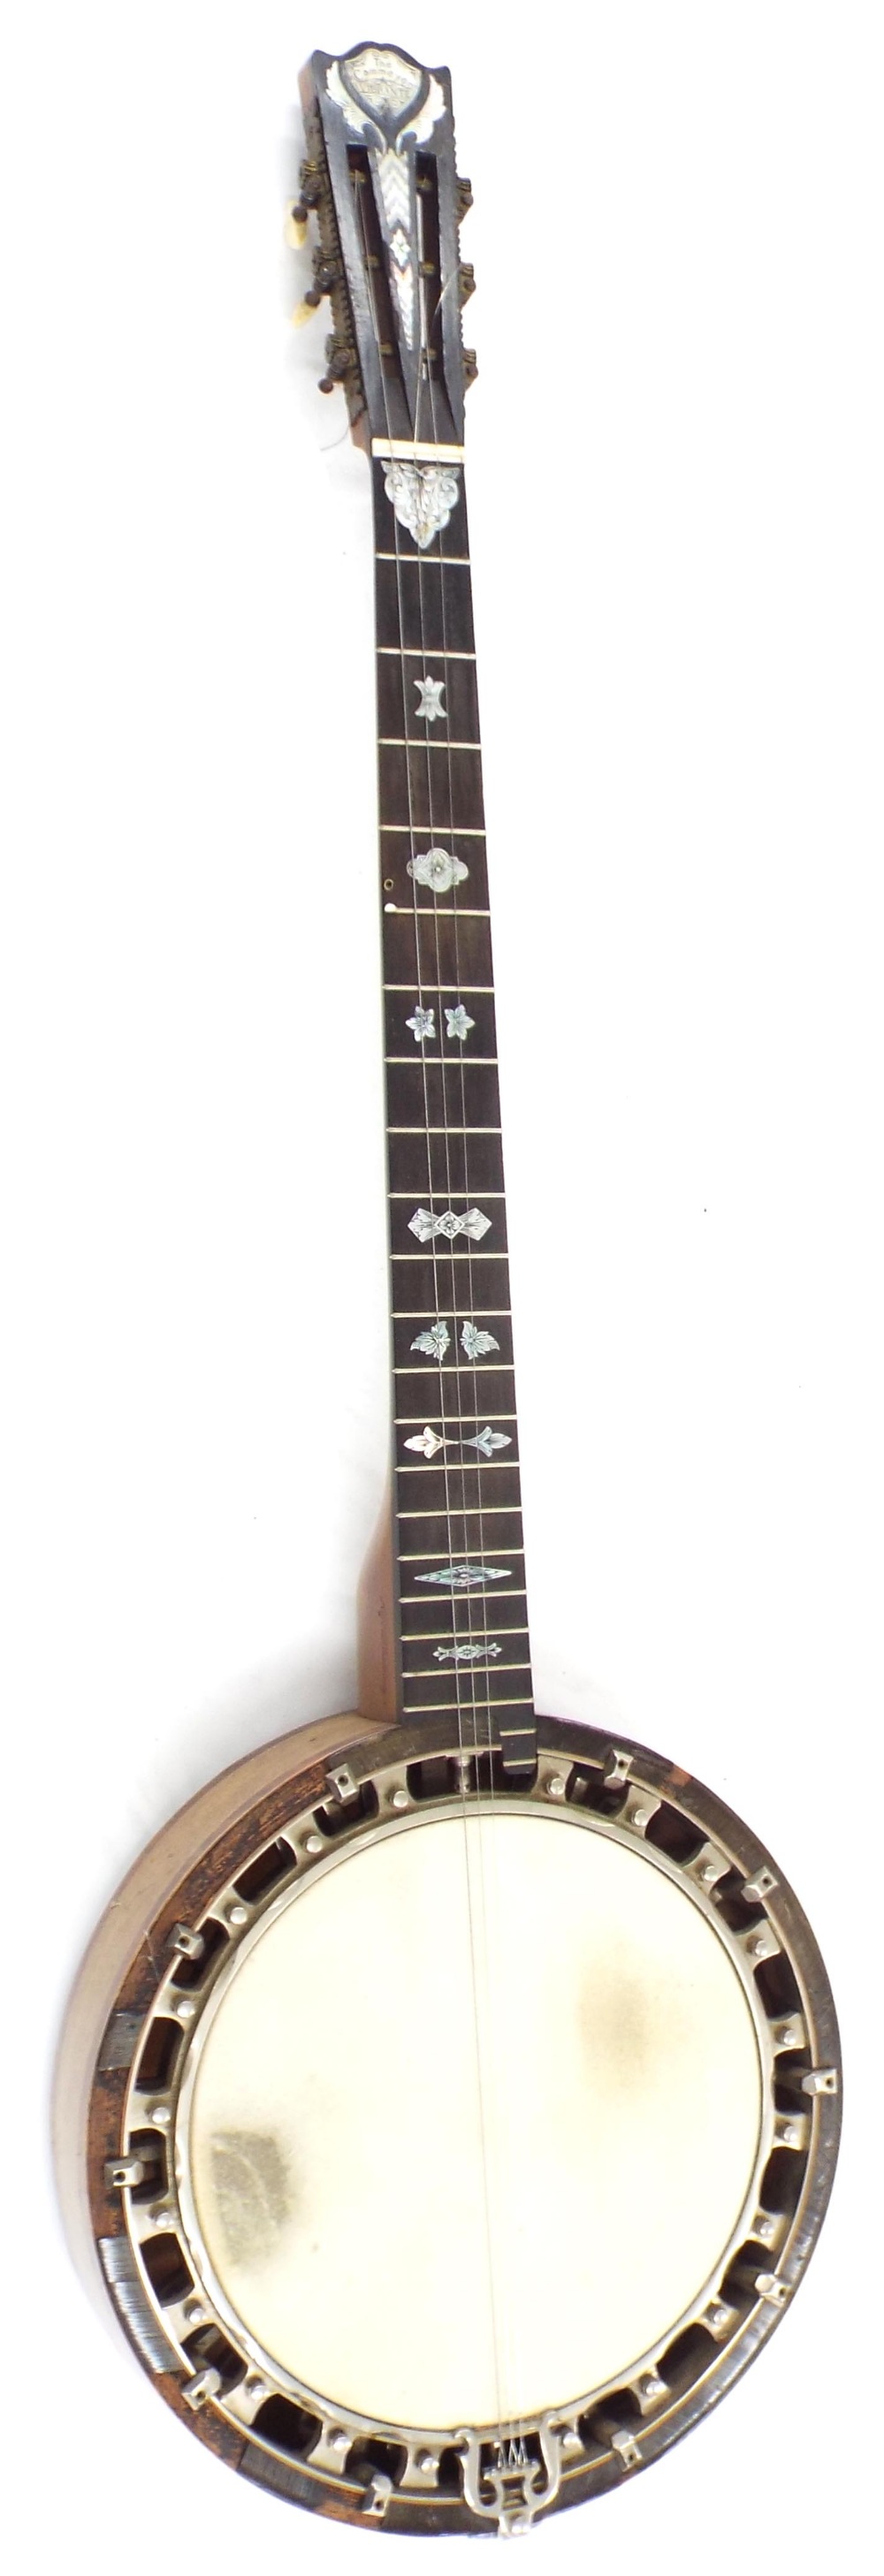 The Cammeyer Vibrante five string banjo, with birds eye maple and walnut cross banded geometric